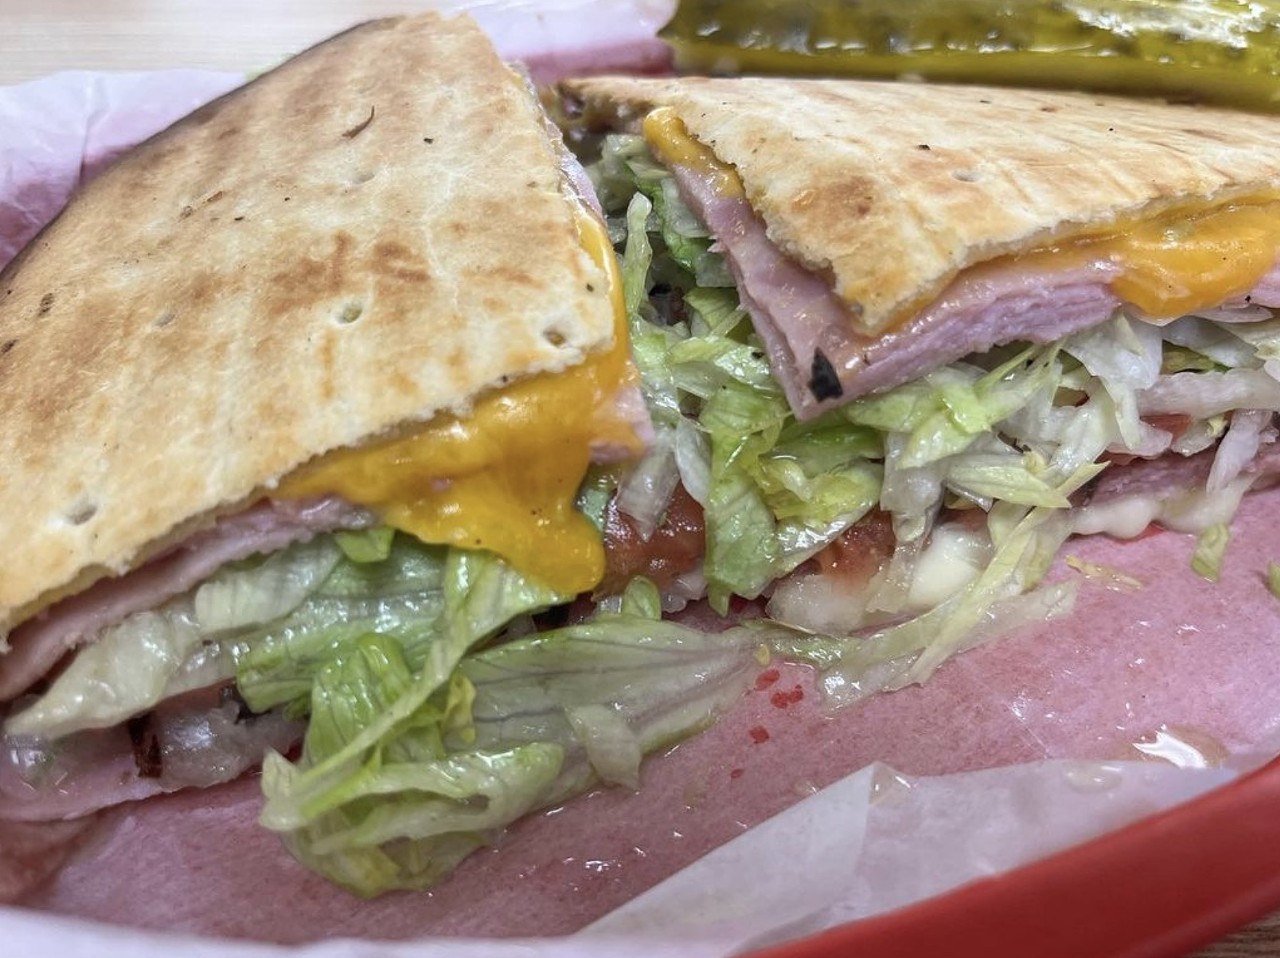 Zito's Deli
1554 Babcock Road, (210) 684-6555, zitosdeli.com
Balcones Heights area locals can now enjoy sandwich fave Zito's Deli’s famous “Serious Sandwich” closer to home! Zito’s has been offering their meat-packed subs off Broadway since 1974, so they know a thing or two about how to make a killer sandwich.